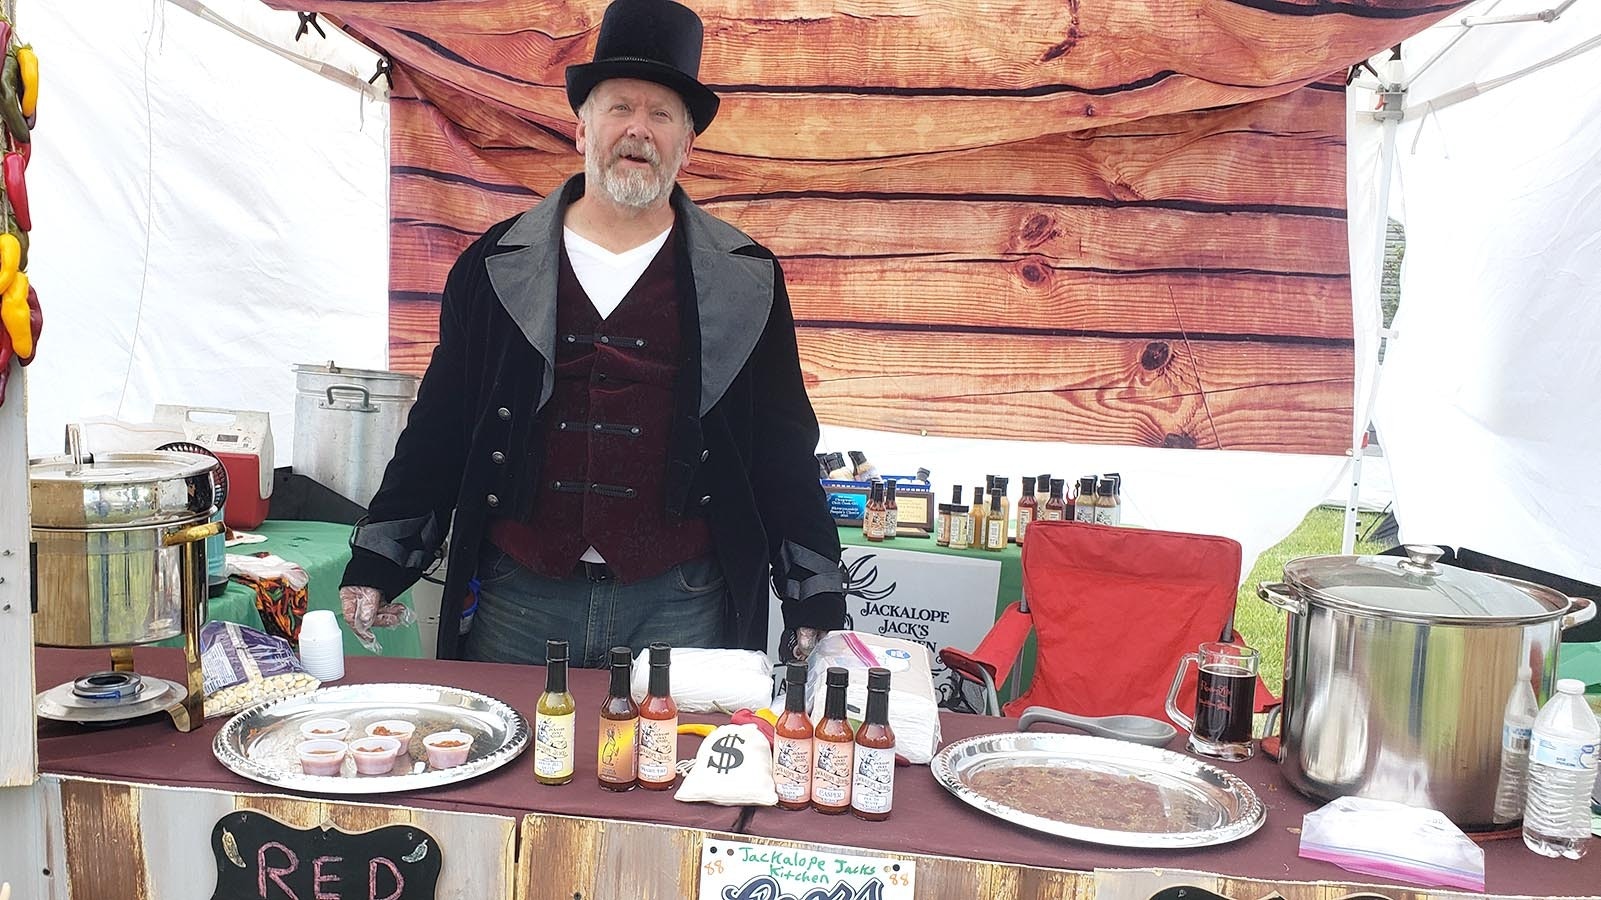 Peter Inells of Cheyenne is Jackalope Jack at the Chugwater Chili Cookoff. He brought his signature Jackalope Juice hot sauces to the event.